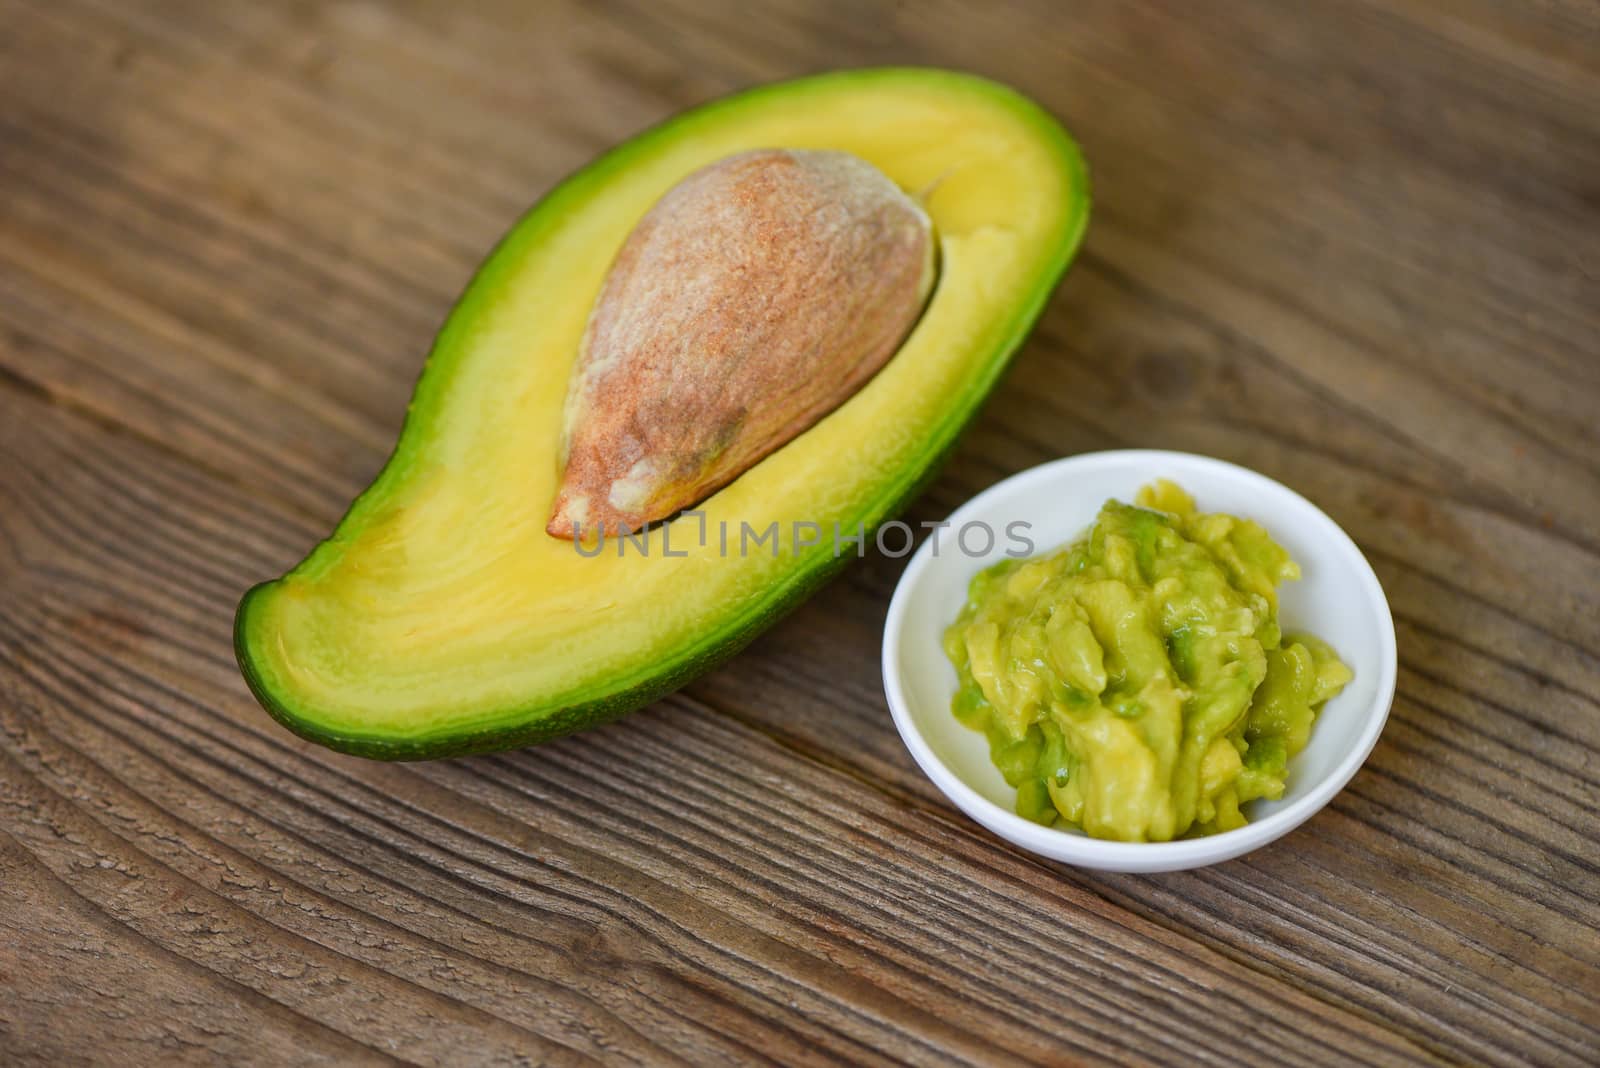 Avocado sliced half and avocado dip mashed on wooden background / Fruits healthy food concept